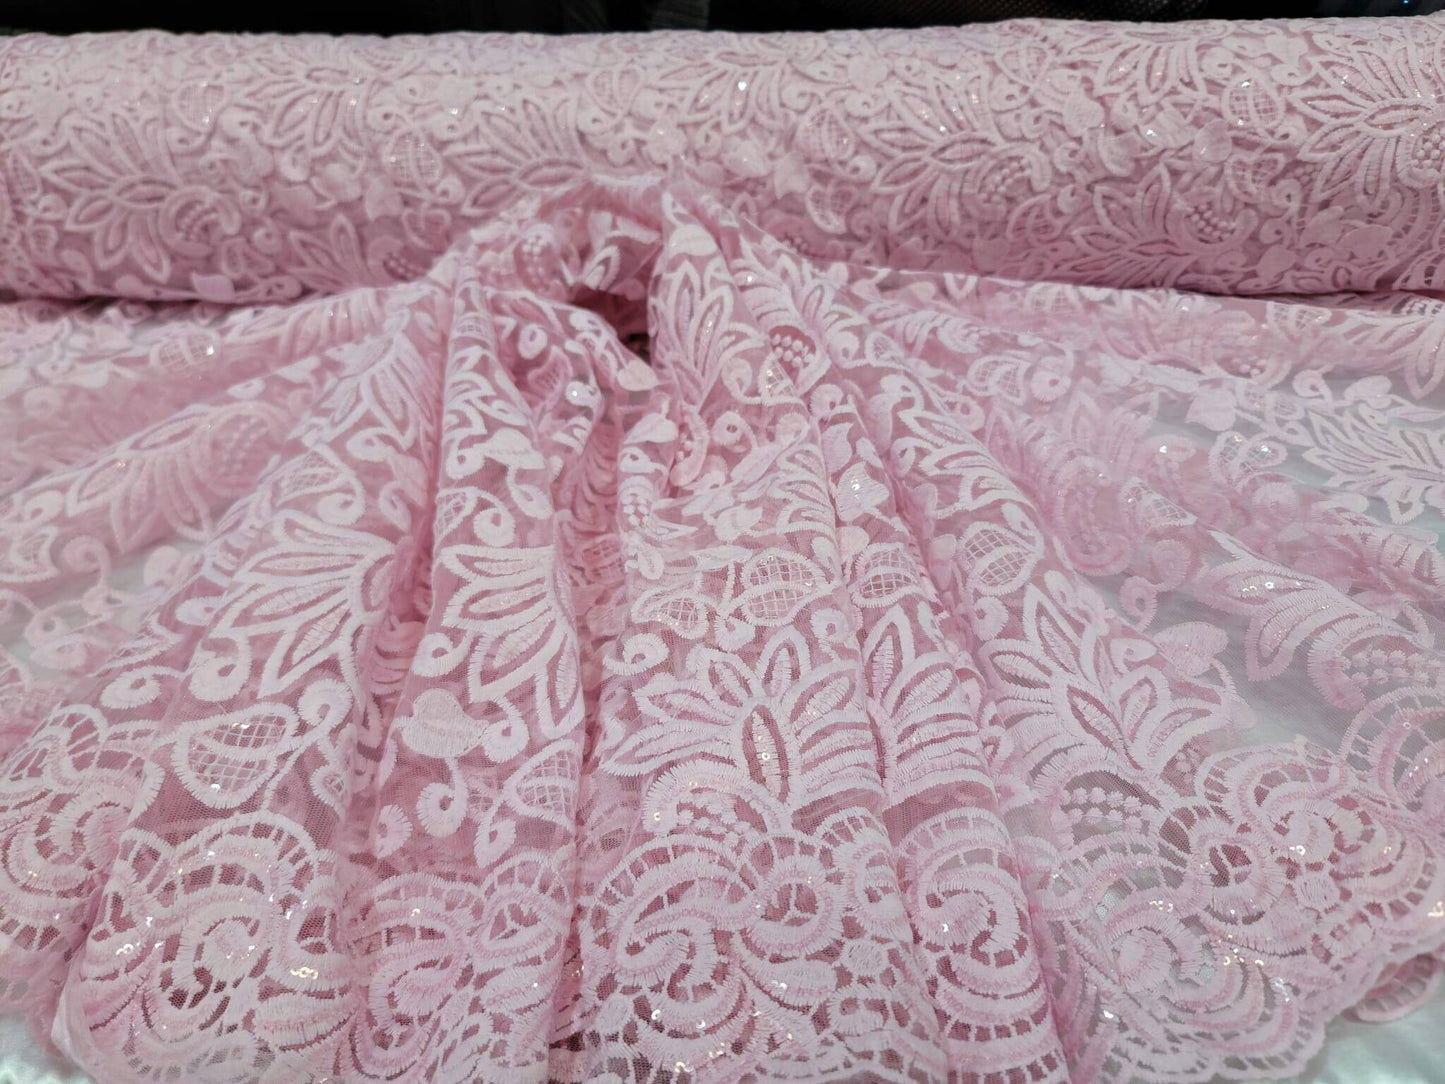 Pink Embroidery Lace Fabric Sold By The Yard The Yard Clear Sequin Double Scalloped Floral flowers Bridal Evening Dress Quinceañera Gown